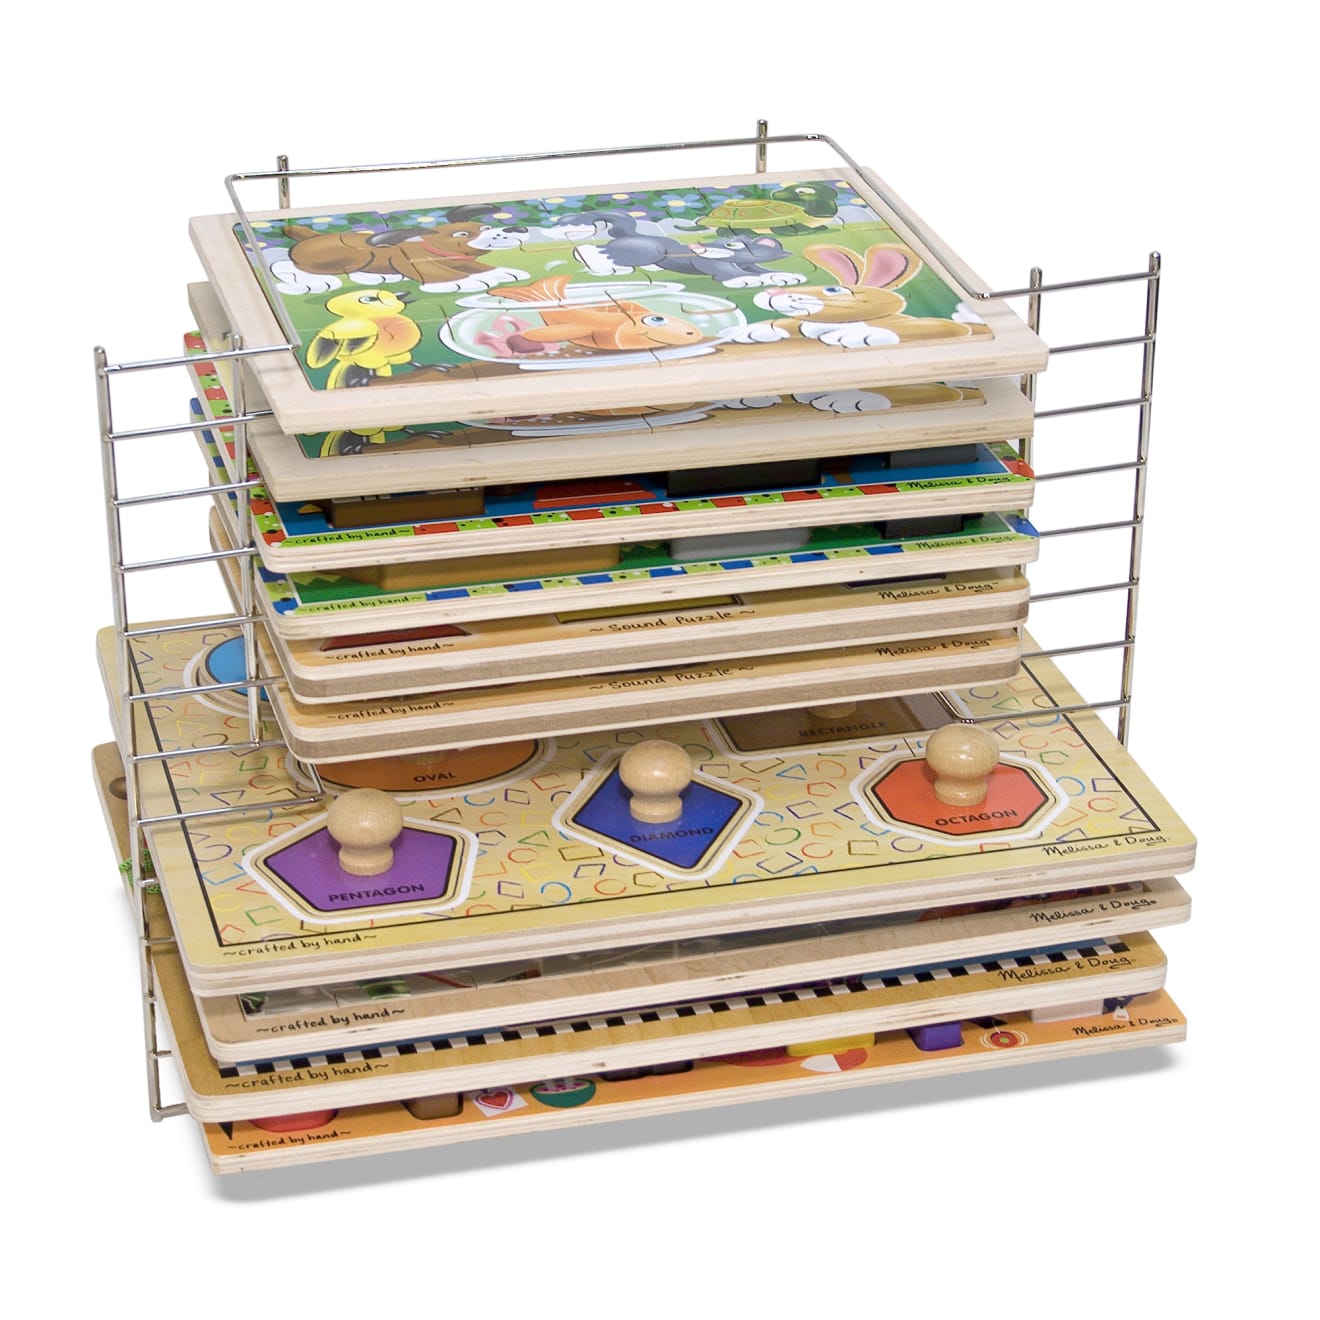 Deluxe Wire Puzzle Rack-Melissa & Doug Product, Holds 12 Wooden Puzzles, New